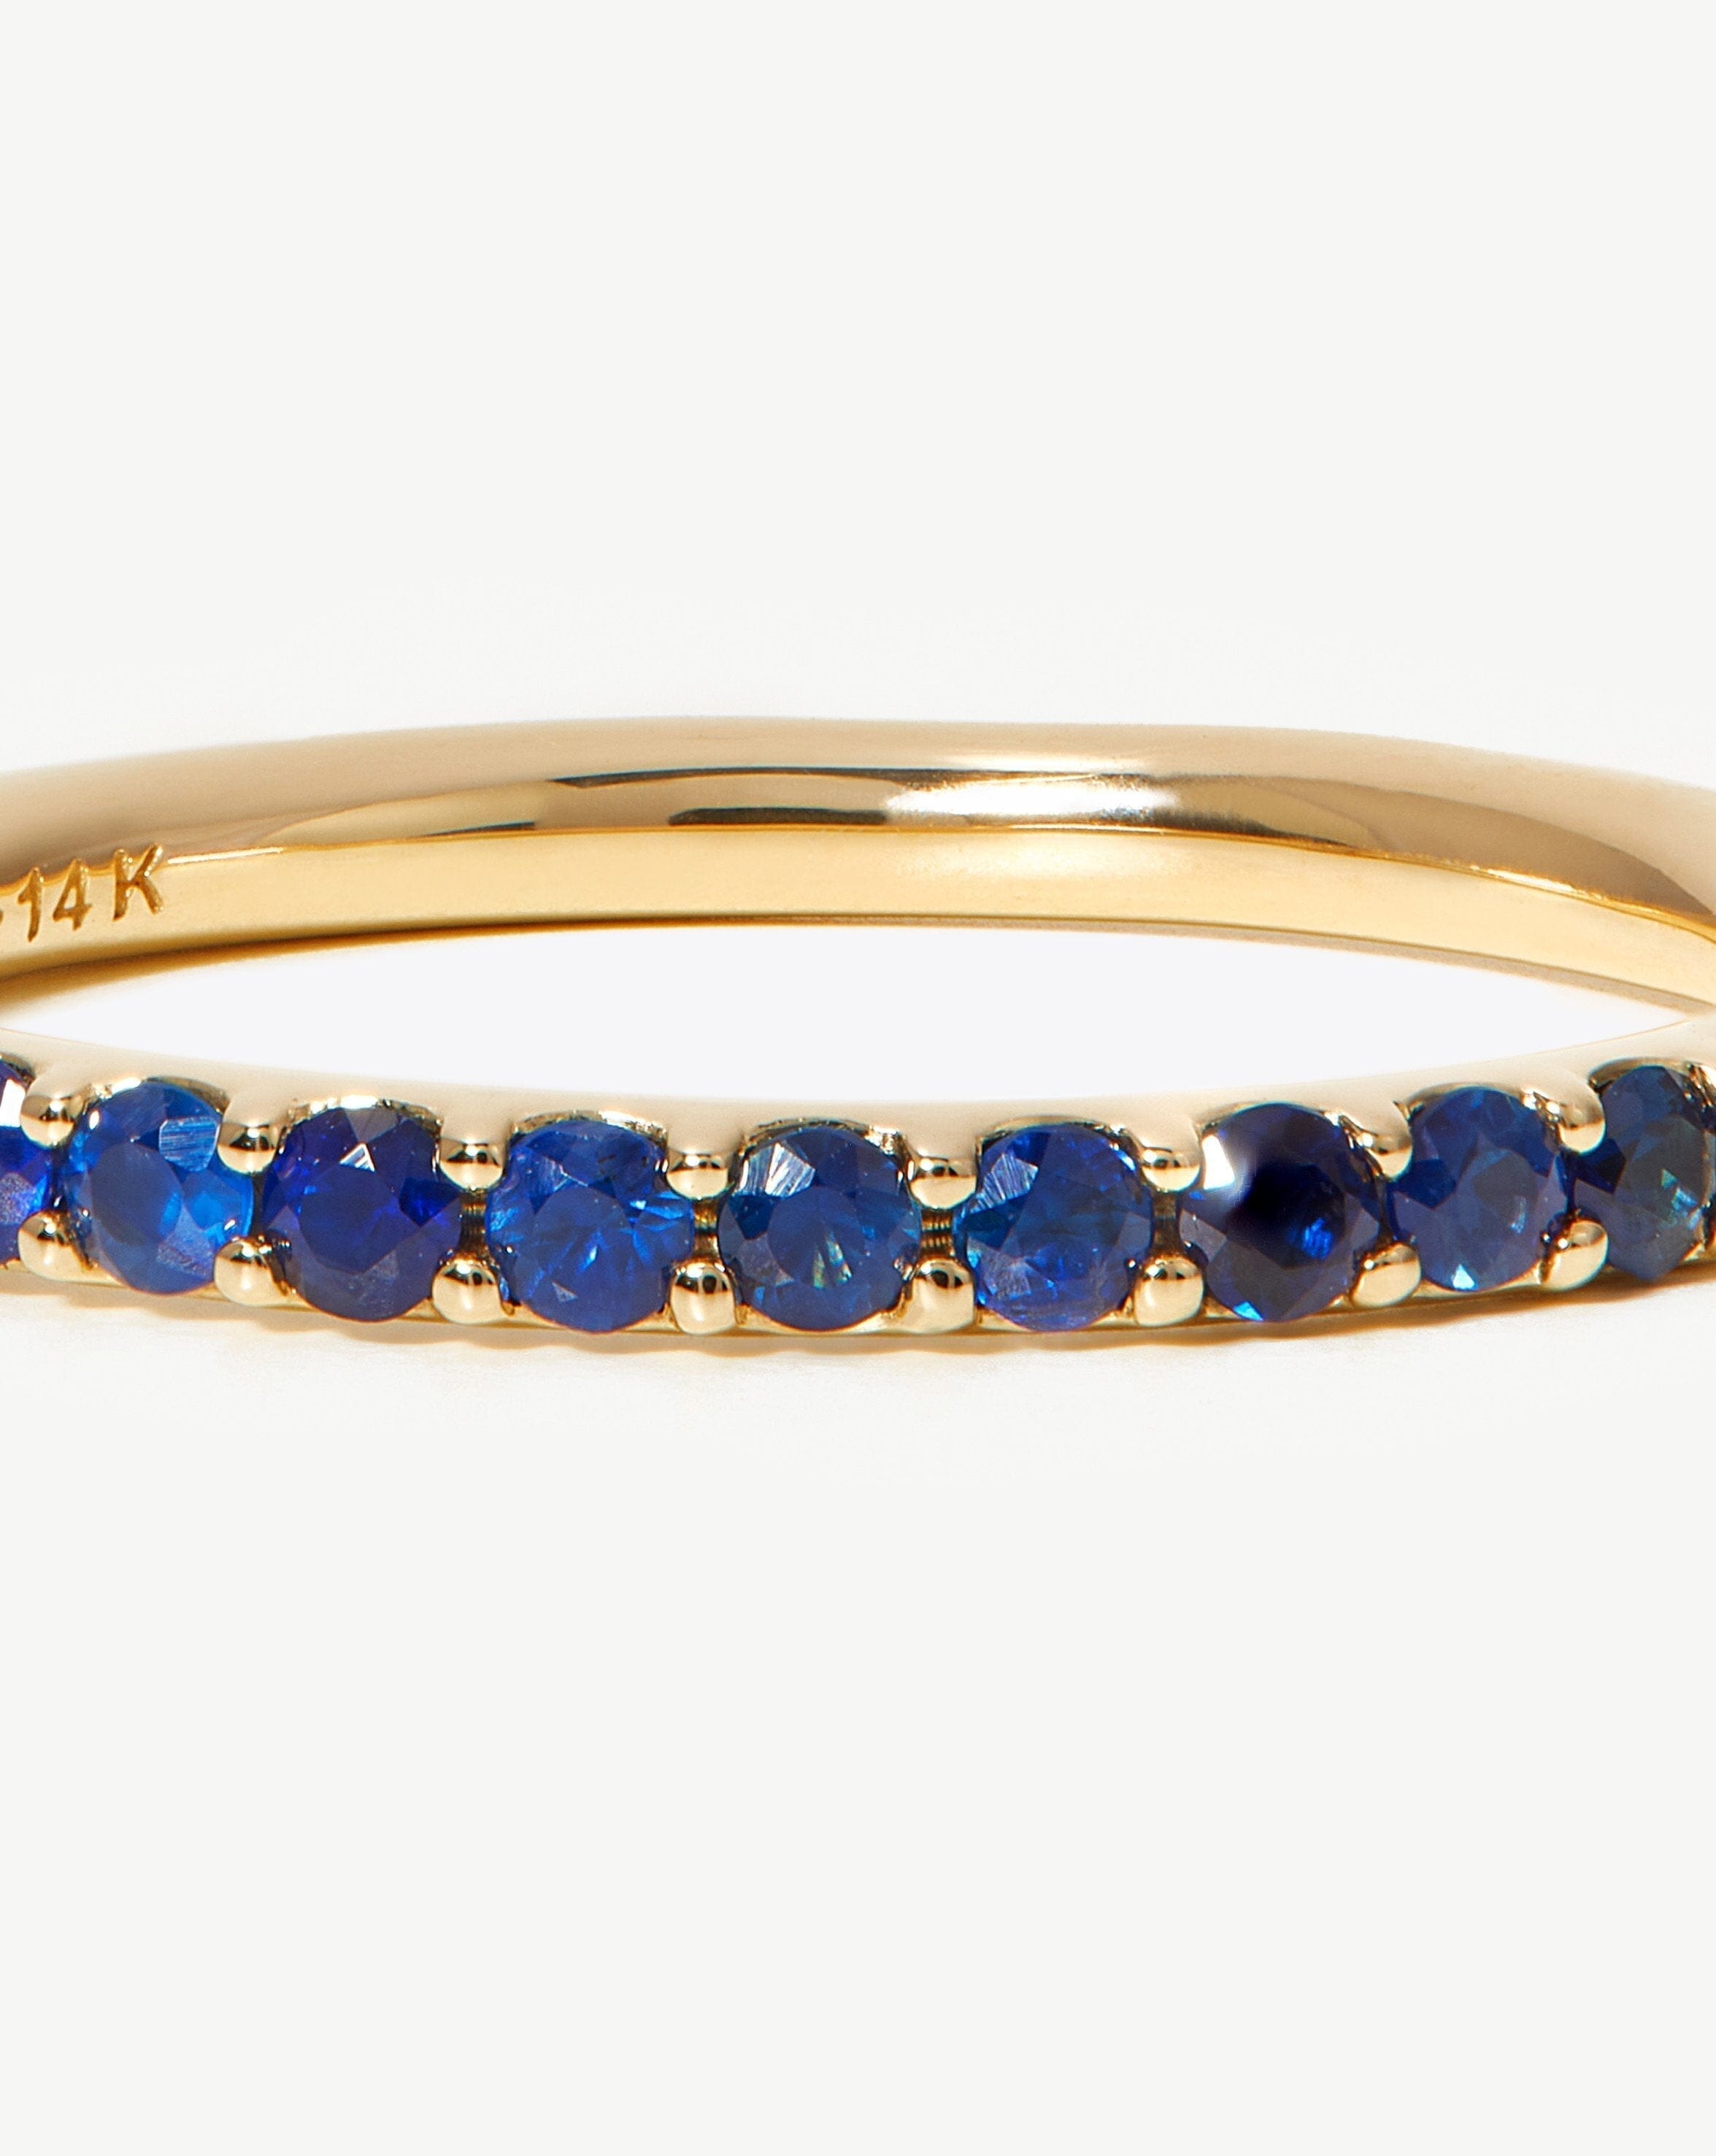 Fine Half Sapphire Eternity Ring | 14ct Solid Gold/Sapphire Rings Missoma 